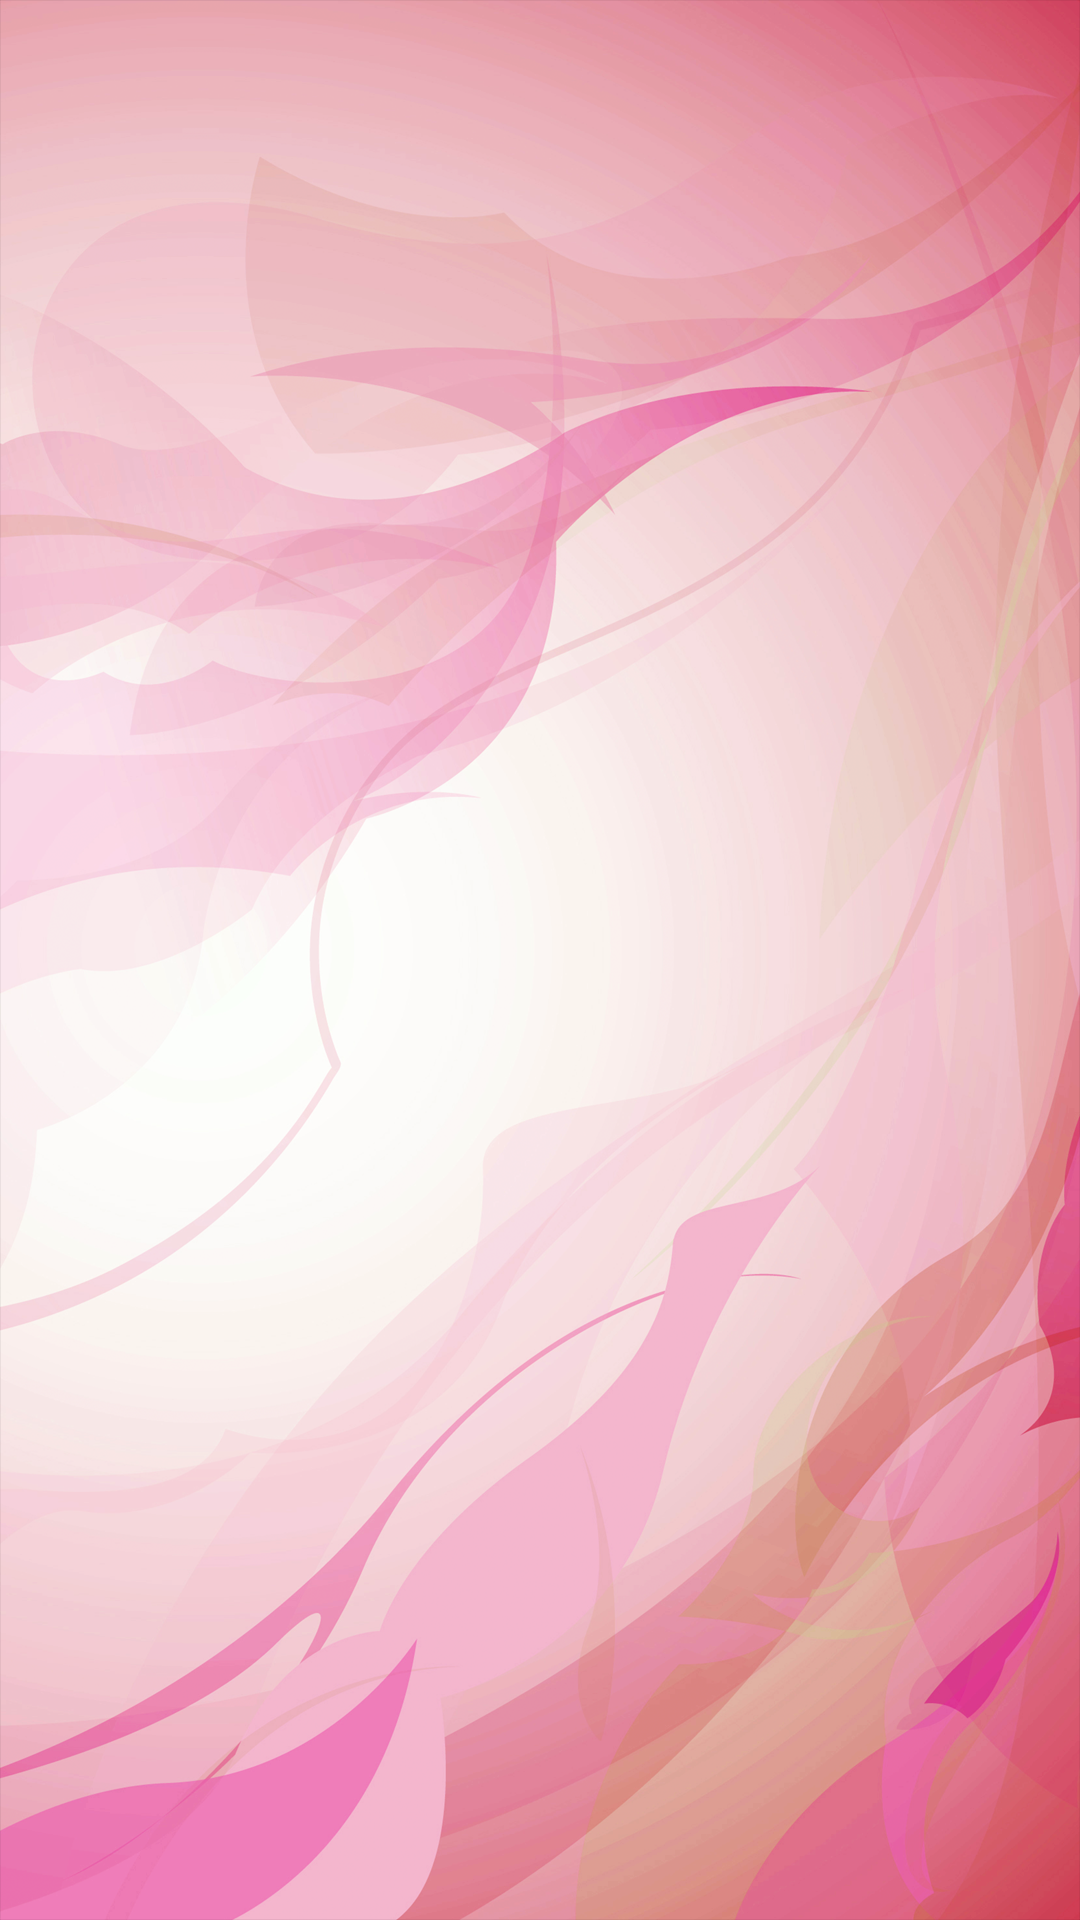 Shades Of Pink. Abstract iphone wallpaper, iPhone wallpaper, Abstract